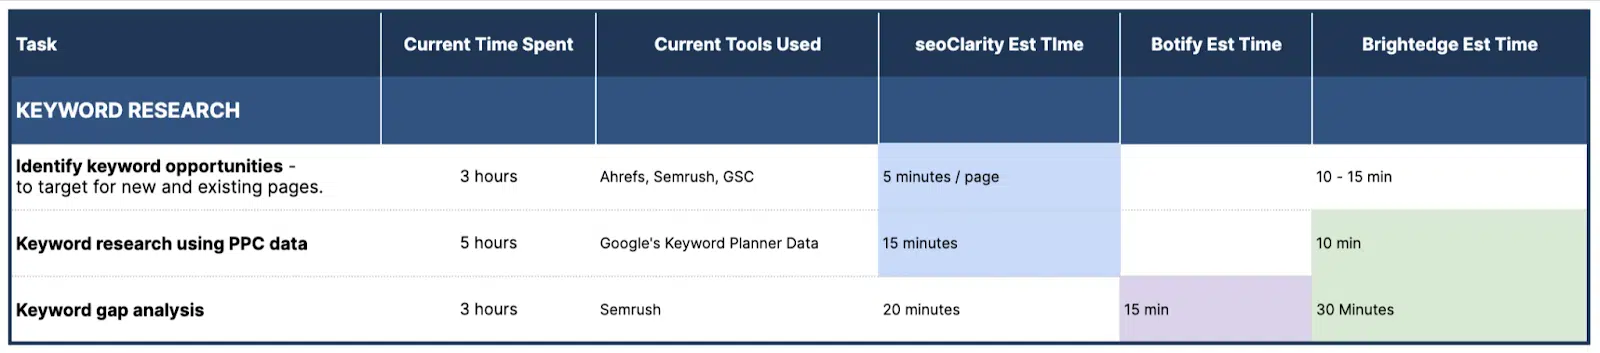 Time estimates for miscellaneous SEO tasks related to keyword research 